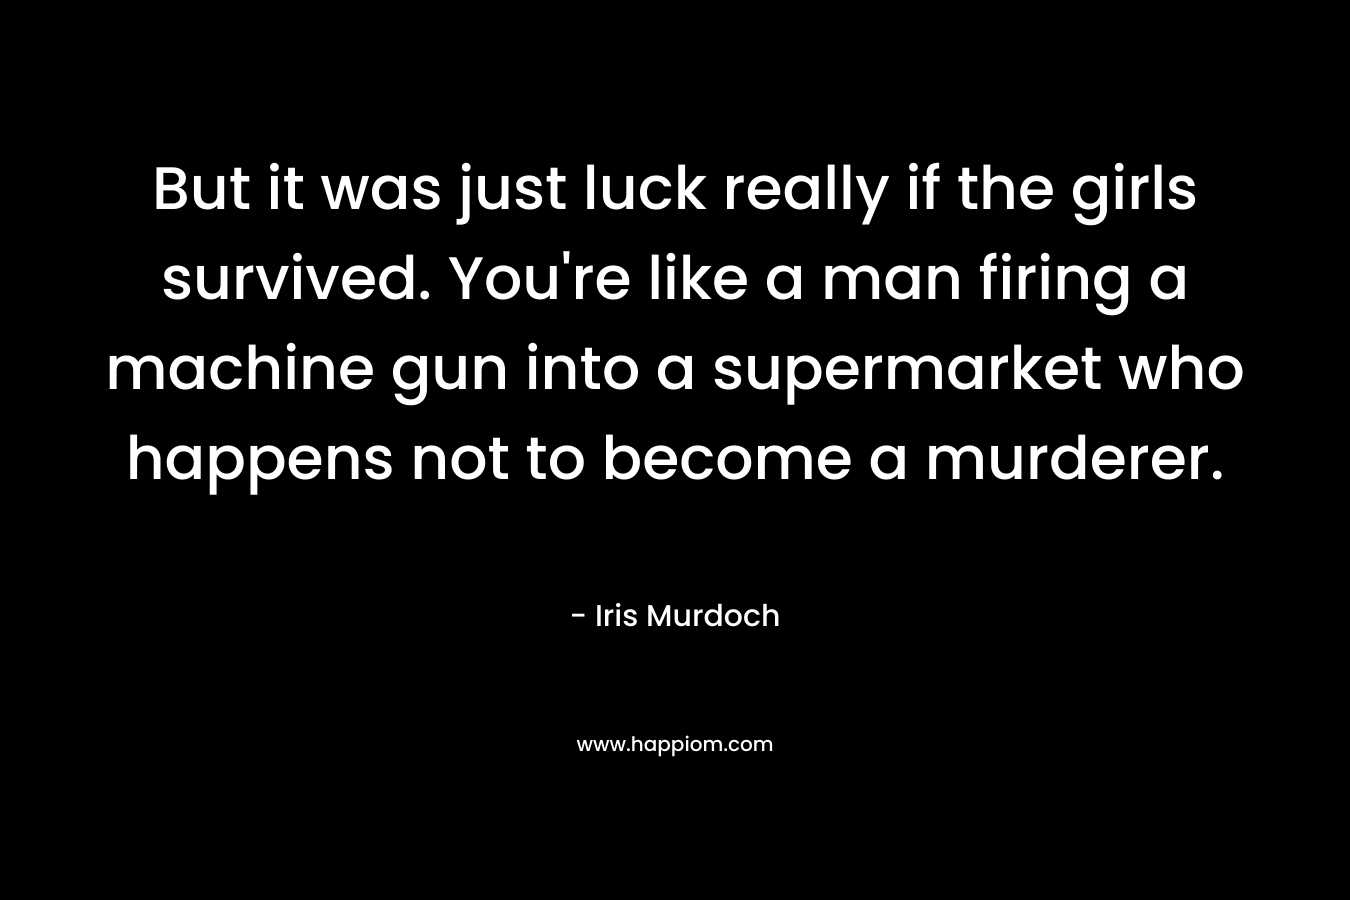 But it was just luck really if the girls survived. You're like a man firing a machine gun into a supermarket who happens not to become a murderer.